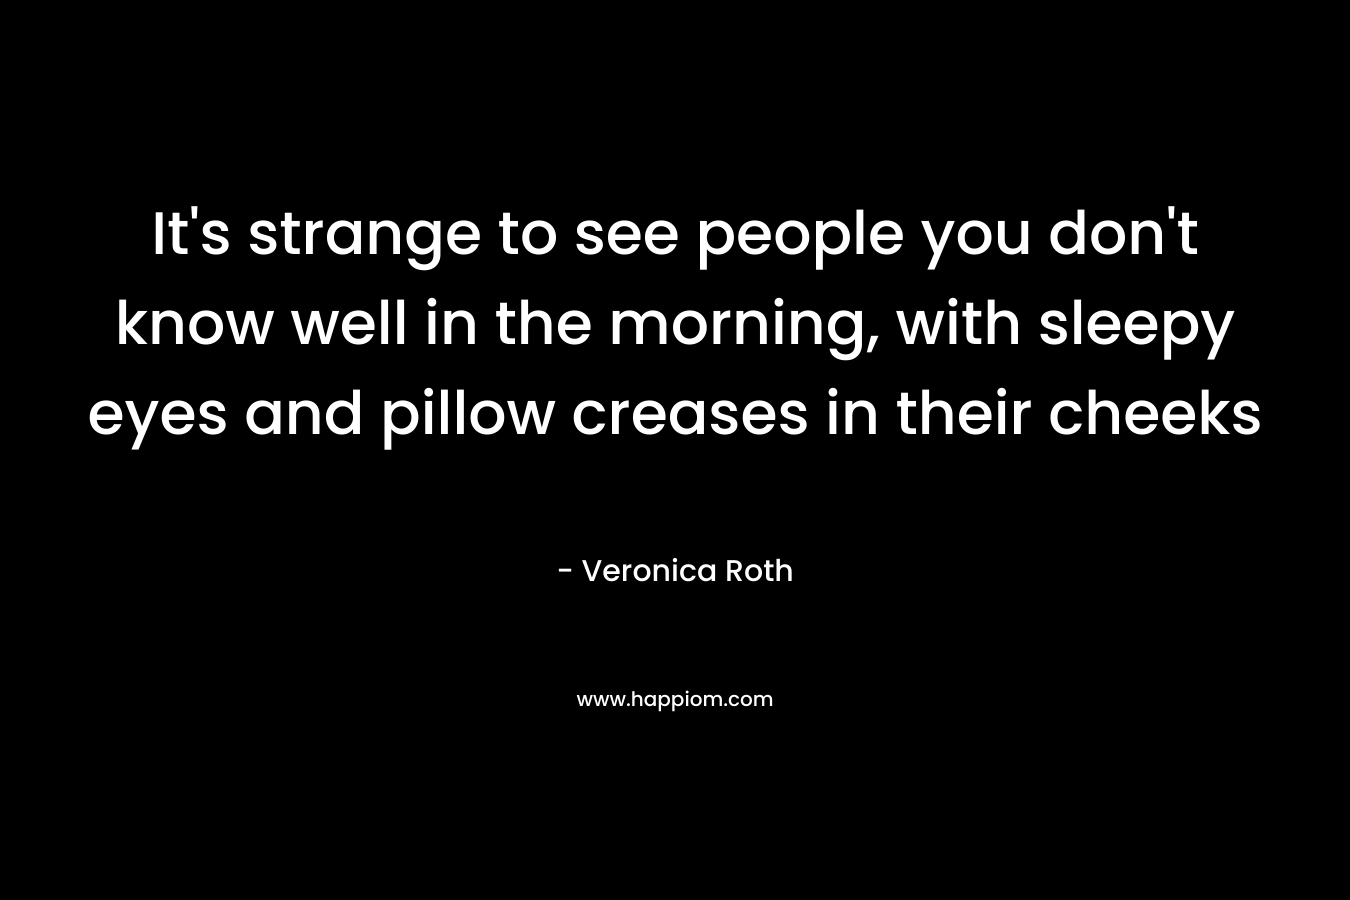 It's strange to see people you don't know well in the morning, with sleepy eyes and pillow creases in their cheeks